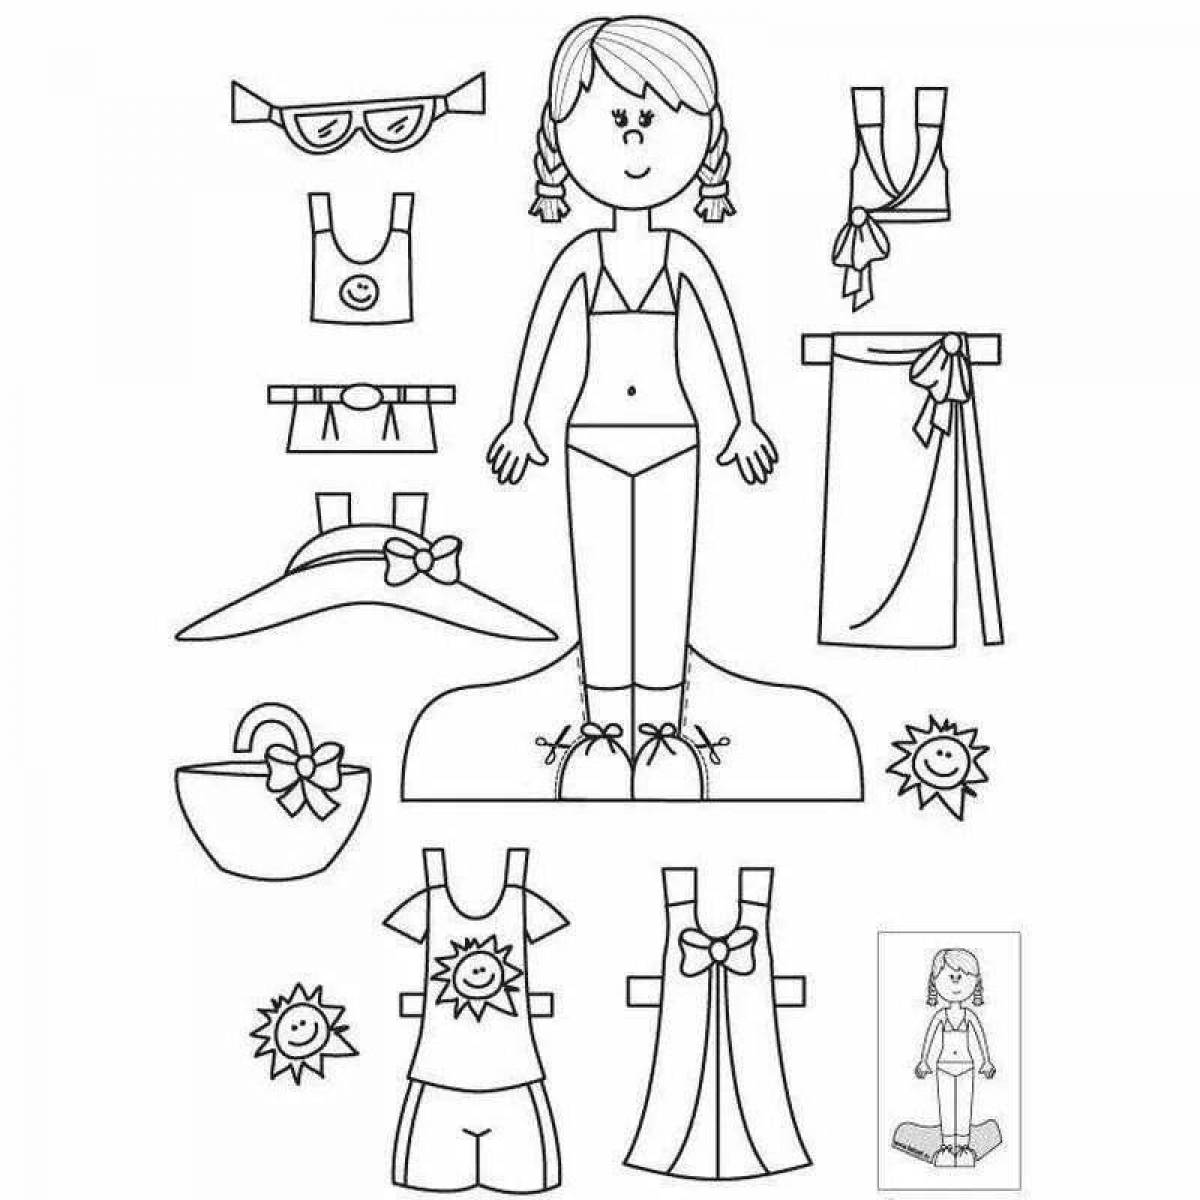 Creative paper doll with clothes to cut out